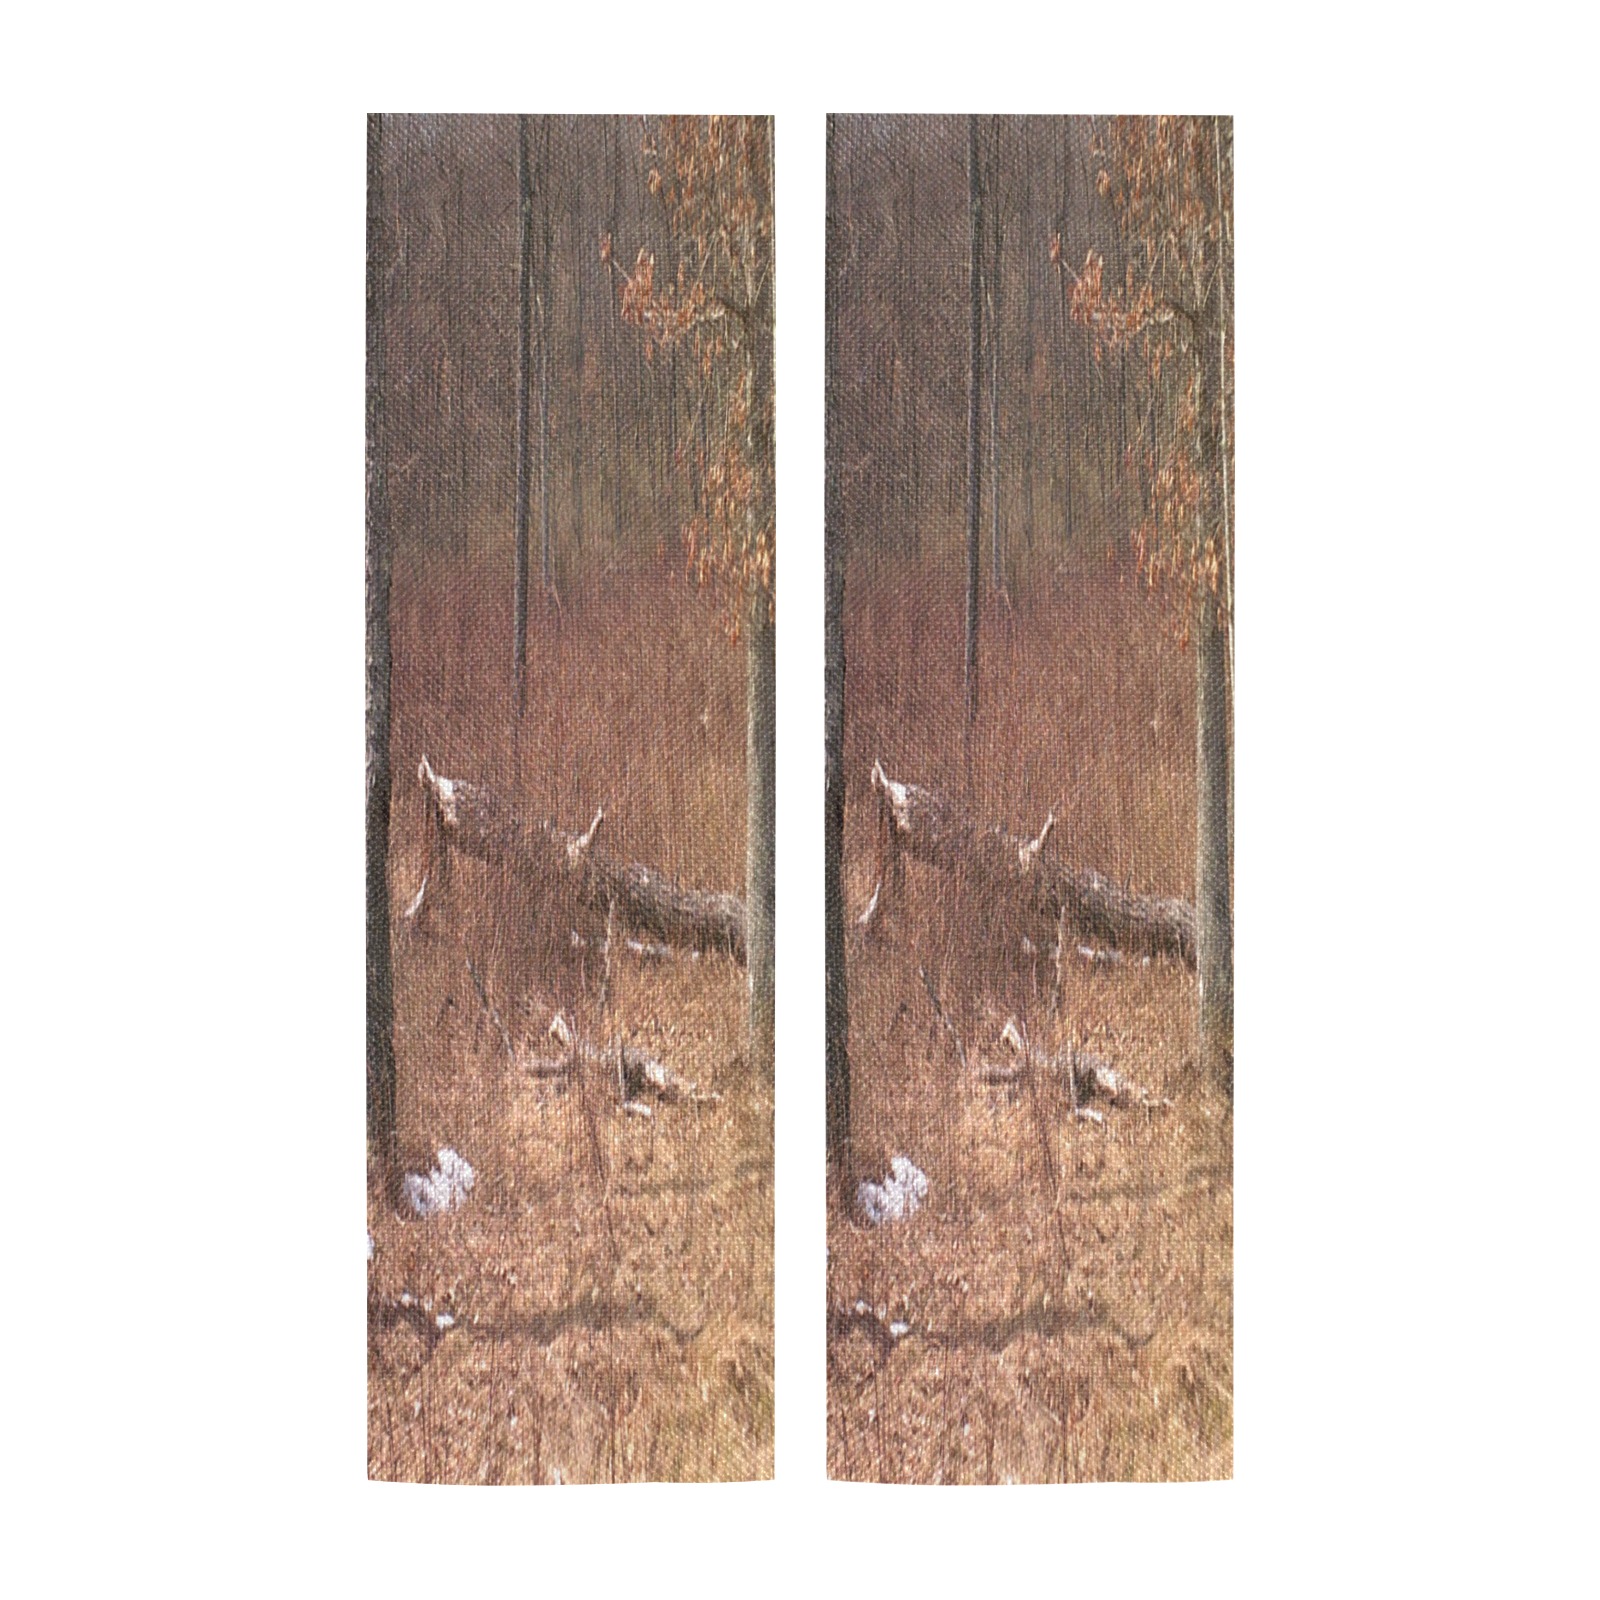 Falling tree in the woods Door Curtain Tapestry